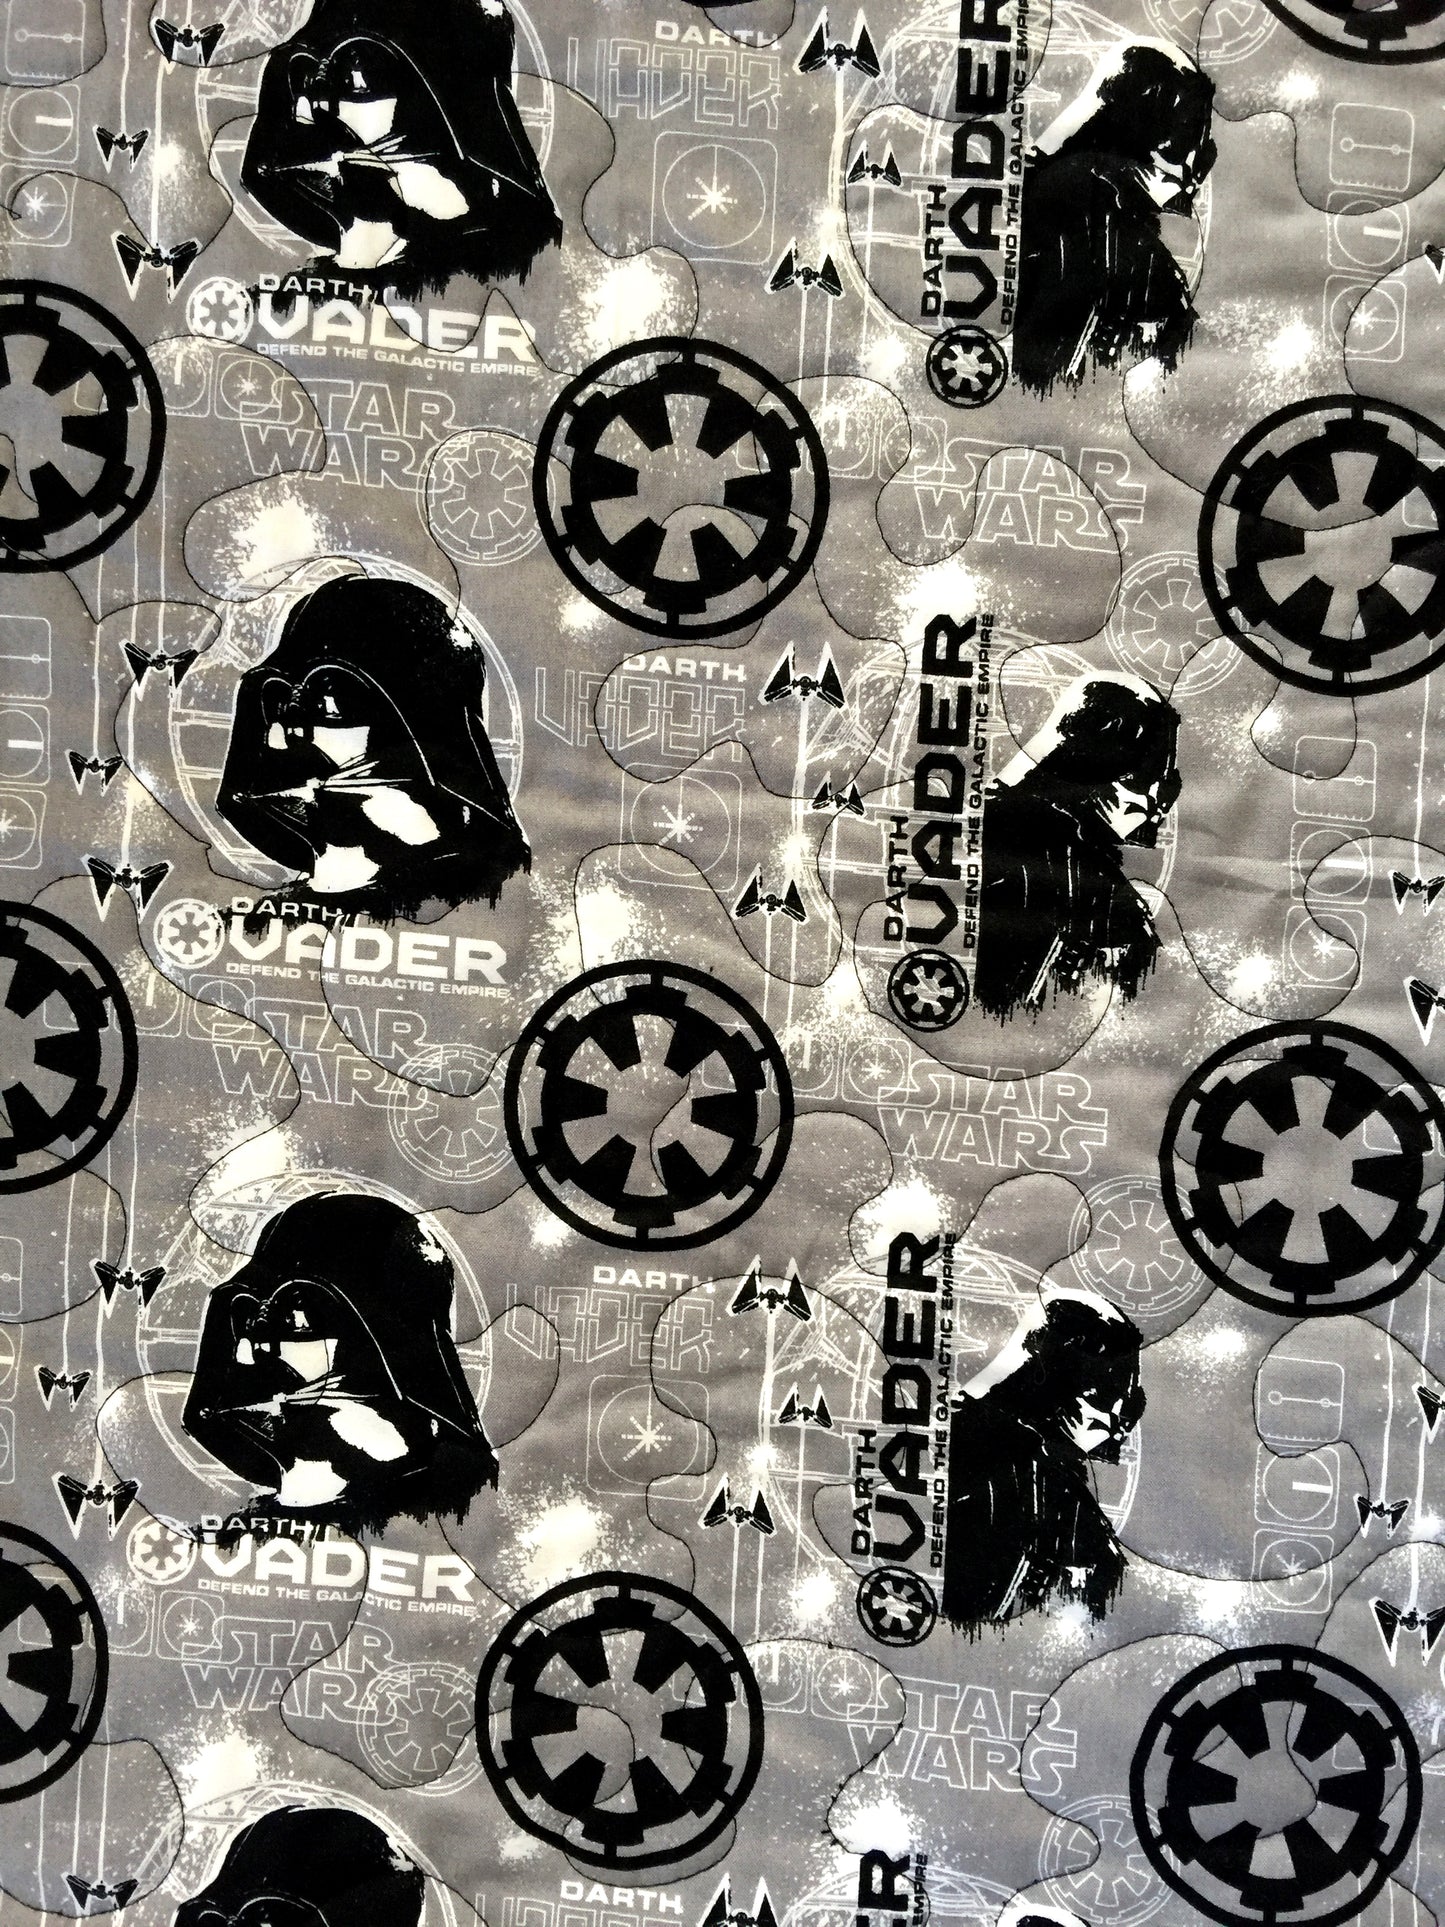 Star Wars Rogue One Villains inspired Quilted Blanket